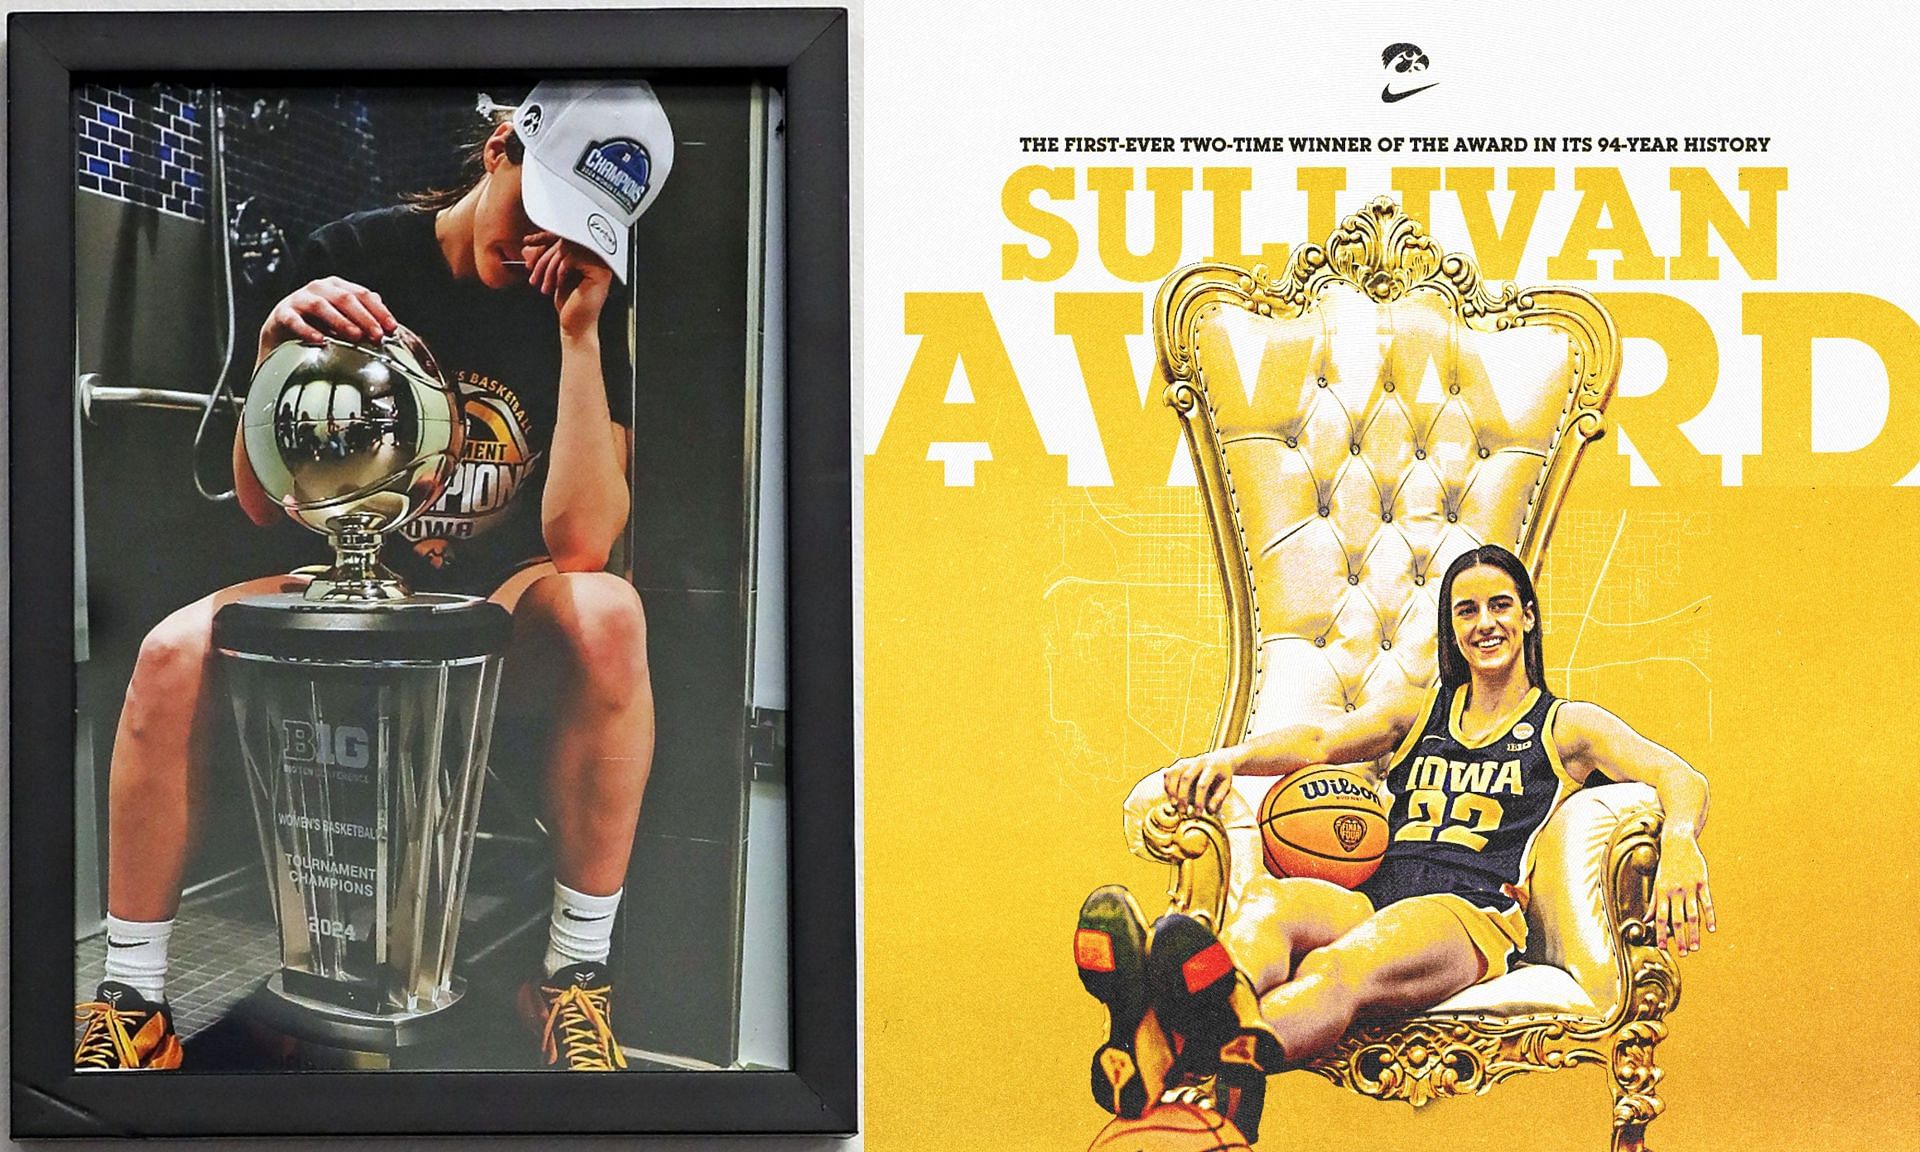 Caitlin Clark achieves the distinction of being the first two-time winner of the Sullivan Award.